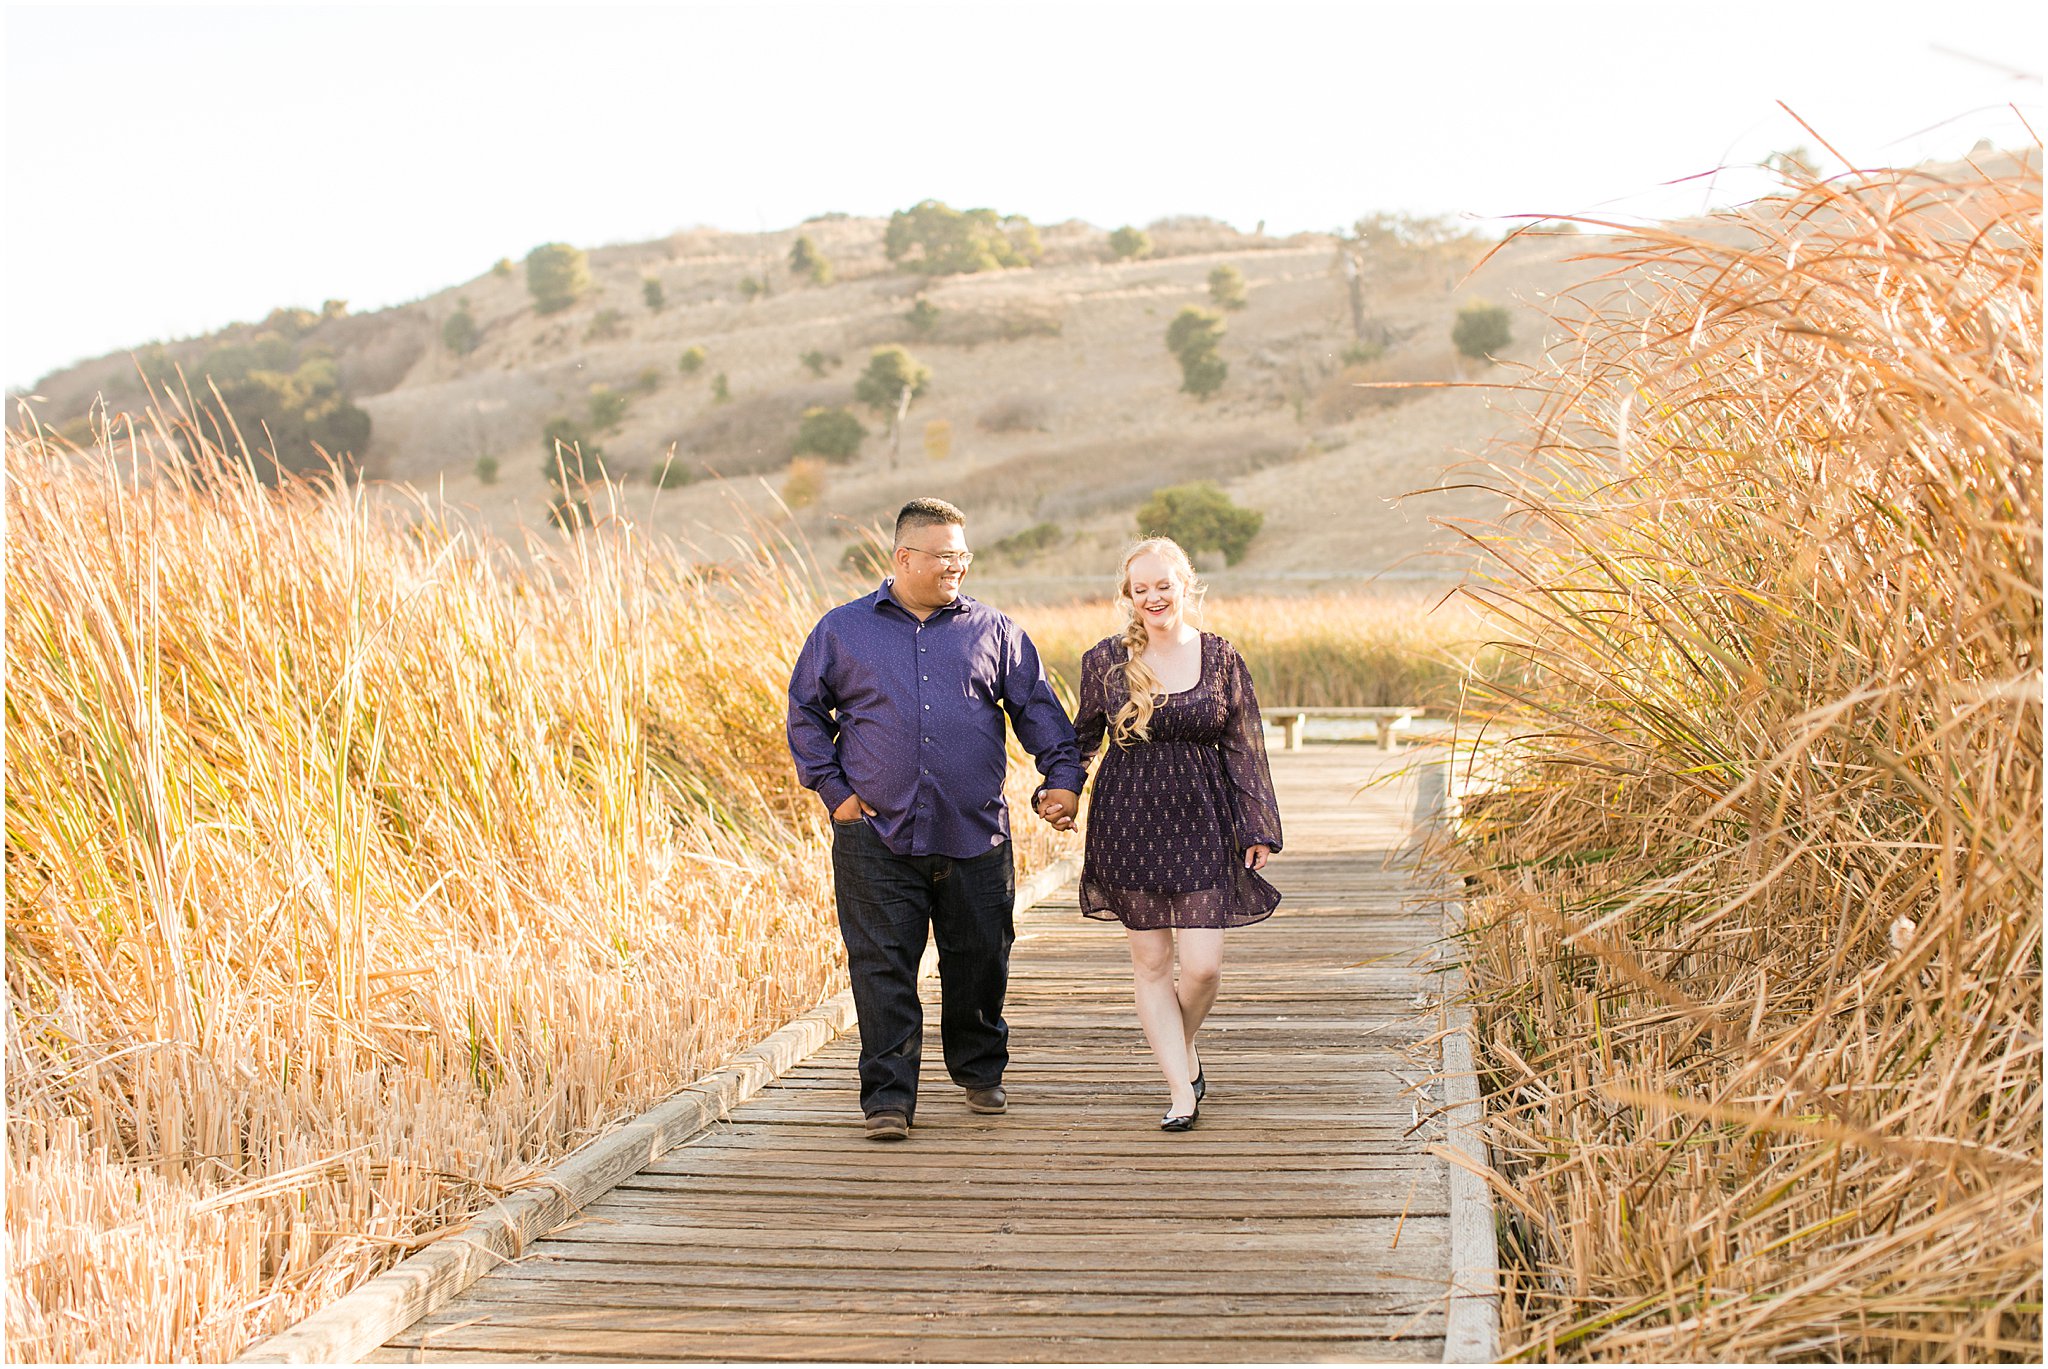 man engaged to woman holding hands walking down dock at golden hour with tall wheat grass around them and hills behind them